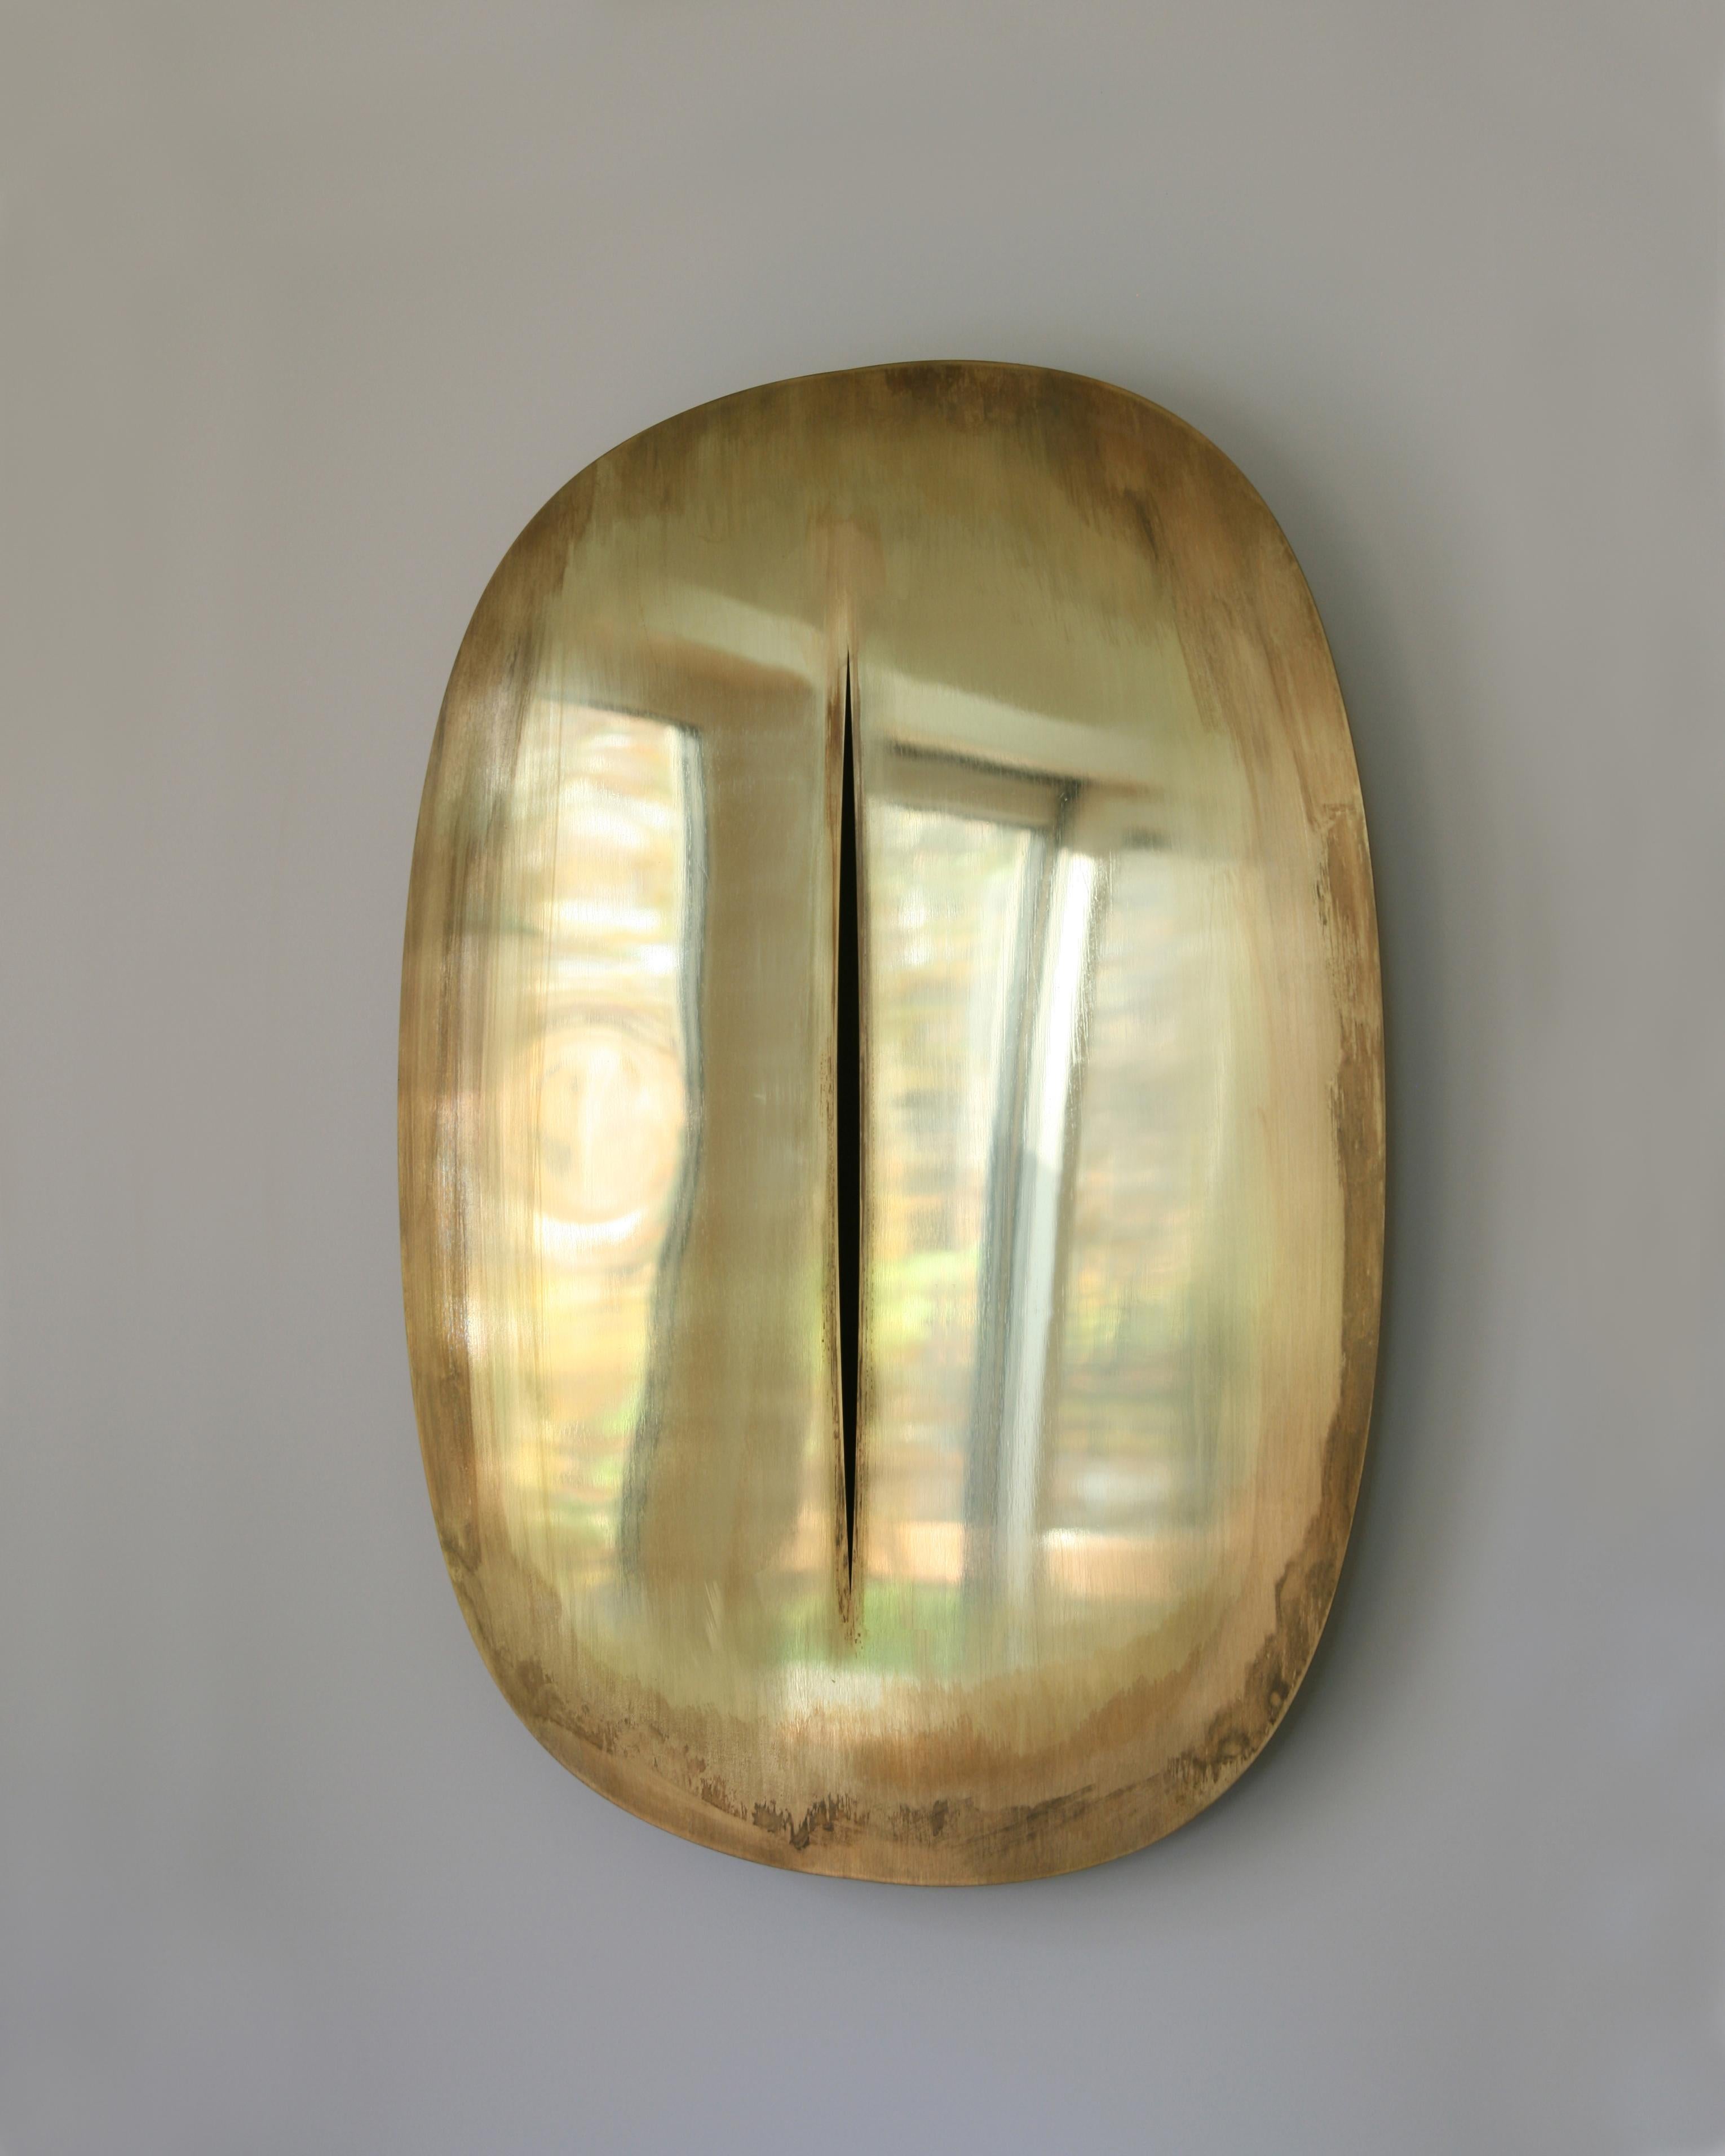 Slit mirror by Phillip Jividen
Limited Edition of 25
Dimensions: W 71 x D 3 x H 94 cm
Materials: Brass
Also available in H 112. Please contact us.

Taking cues from Lucio Fontana’s Slash paintings, the Slit Mirror merges the boundaries of art and